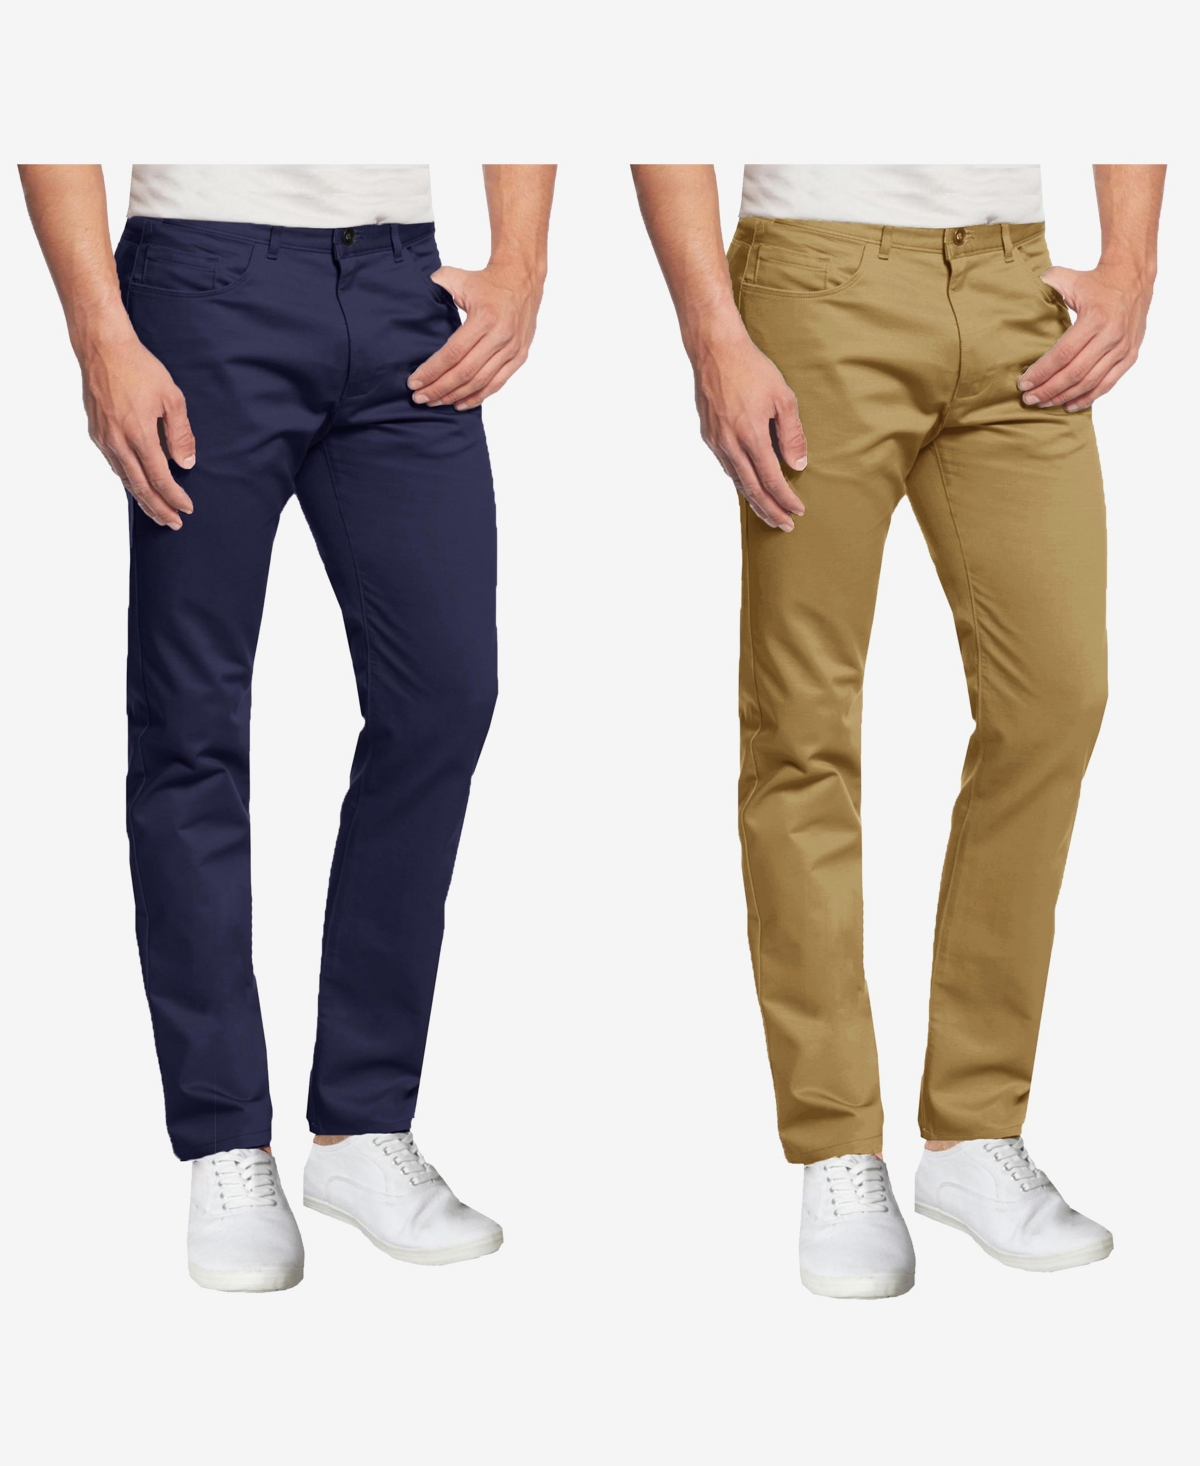 Galaxy By Harvic Men's 5-pocket Ultra-stretch Skinny Fit Chino Pants, Pack Of 2 In Timber,navy